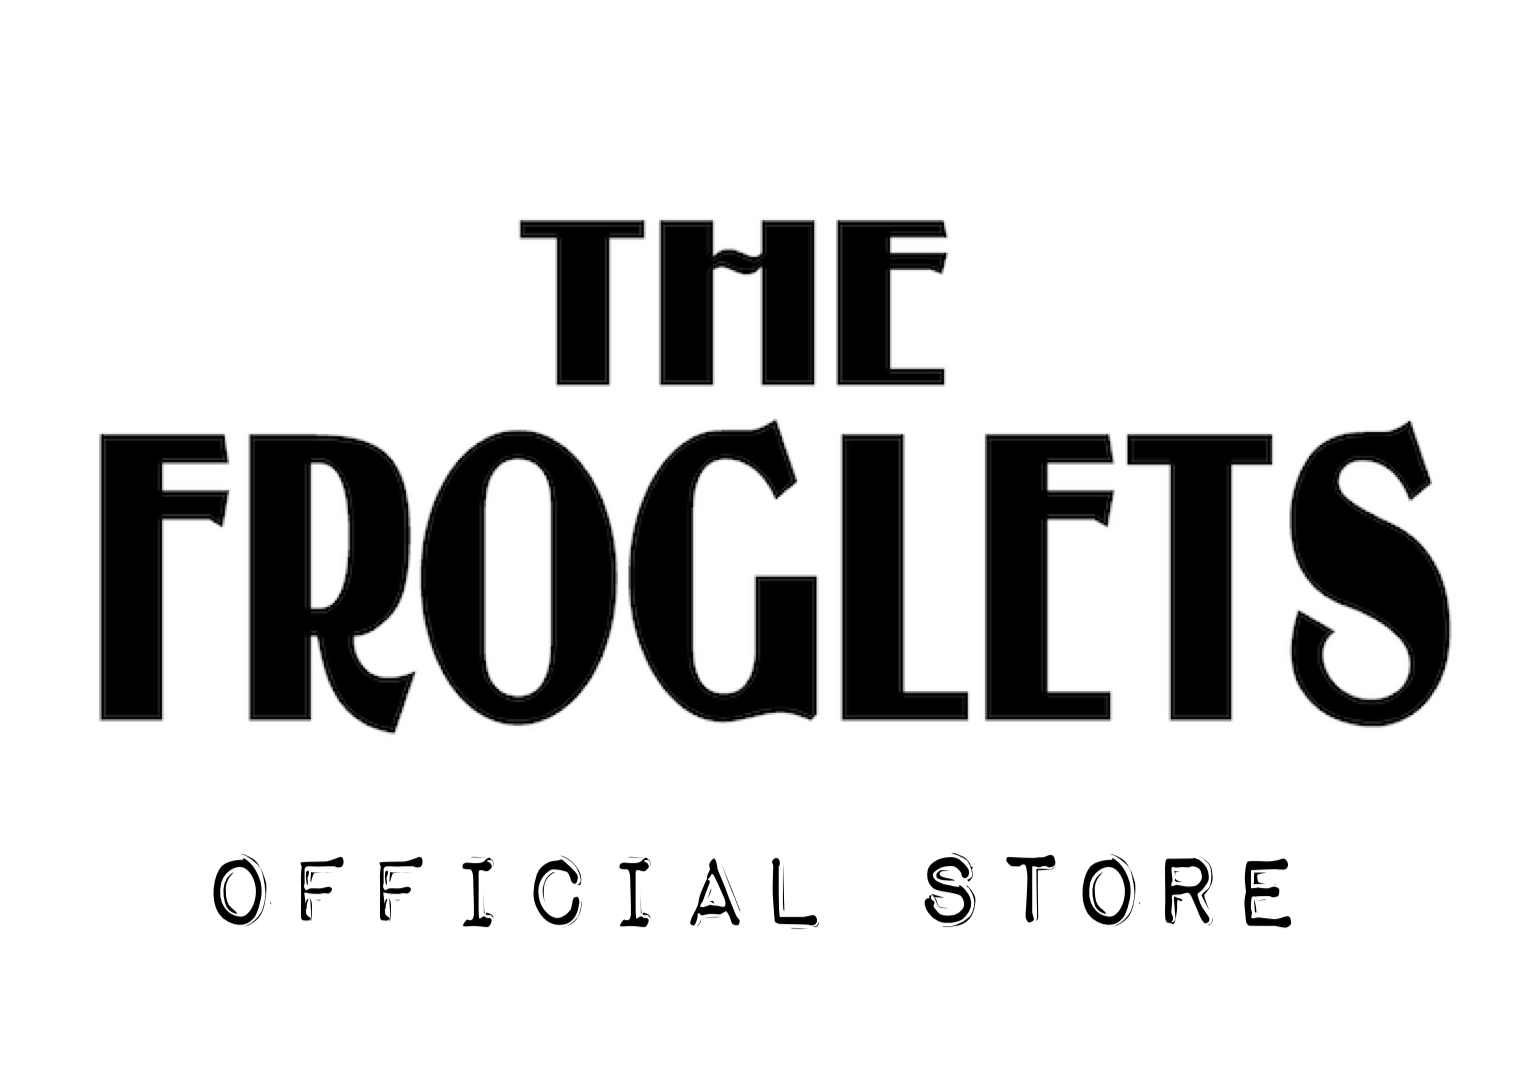 THE FROGLETS Official Store